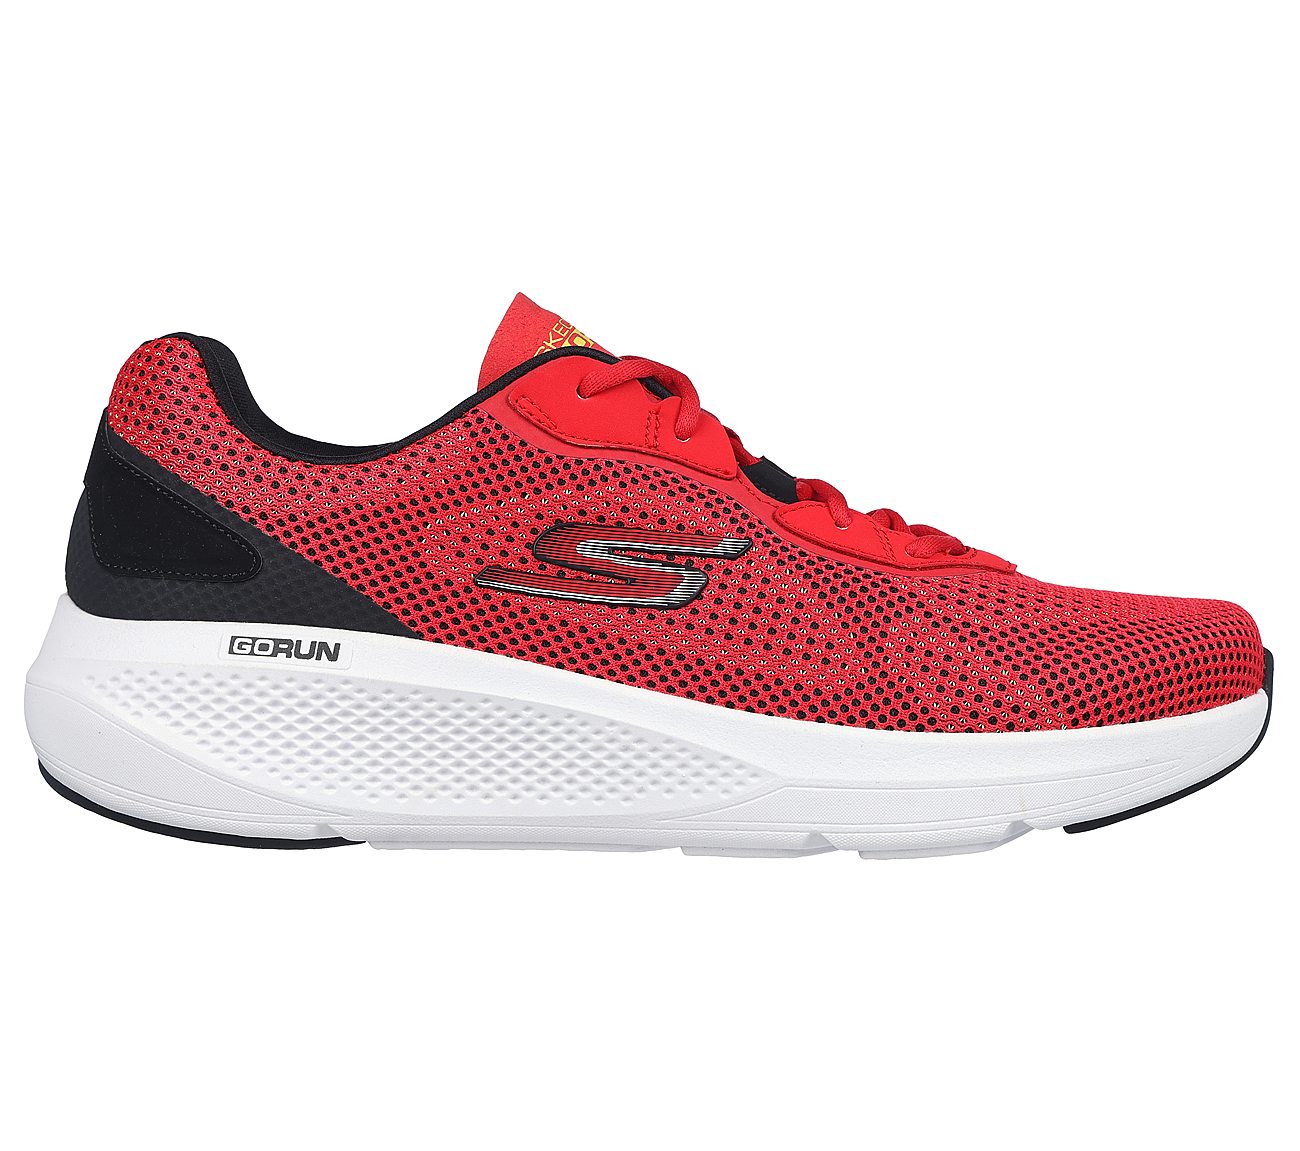 GO RUN ELEVATE, RED/BLACK Footwear Lateral View